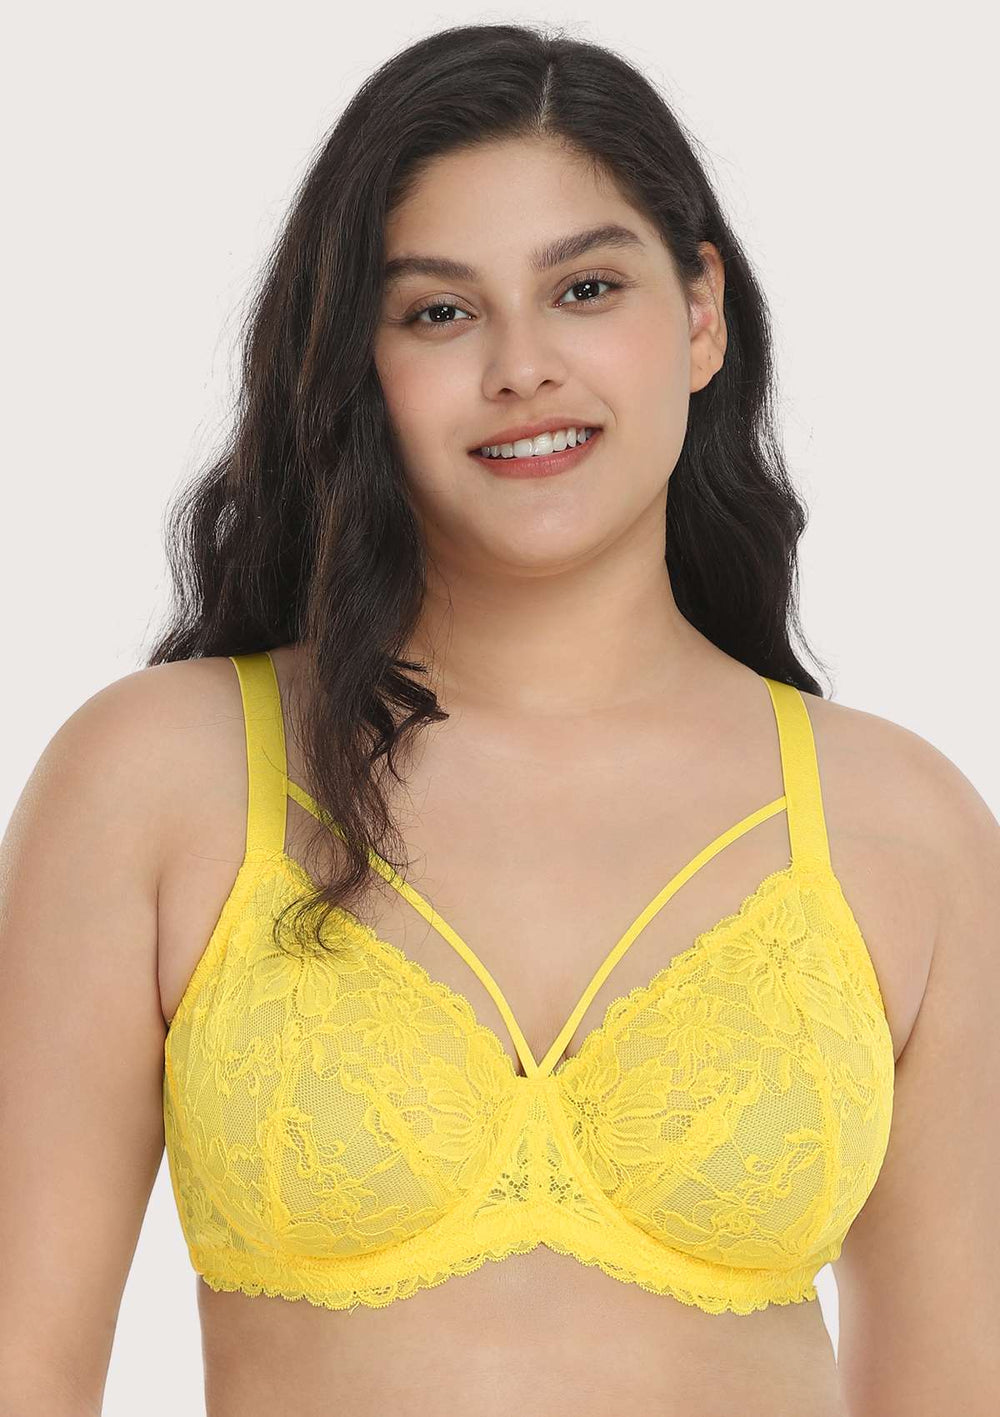 Bras Summer Unpadded Bras Womens Plus Size Lace Unlined Bralette Full Cup  Minimizer Wire Free Brassiere Sexy Lingerie BH YQ231101 From Ephemerall,  $11.55